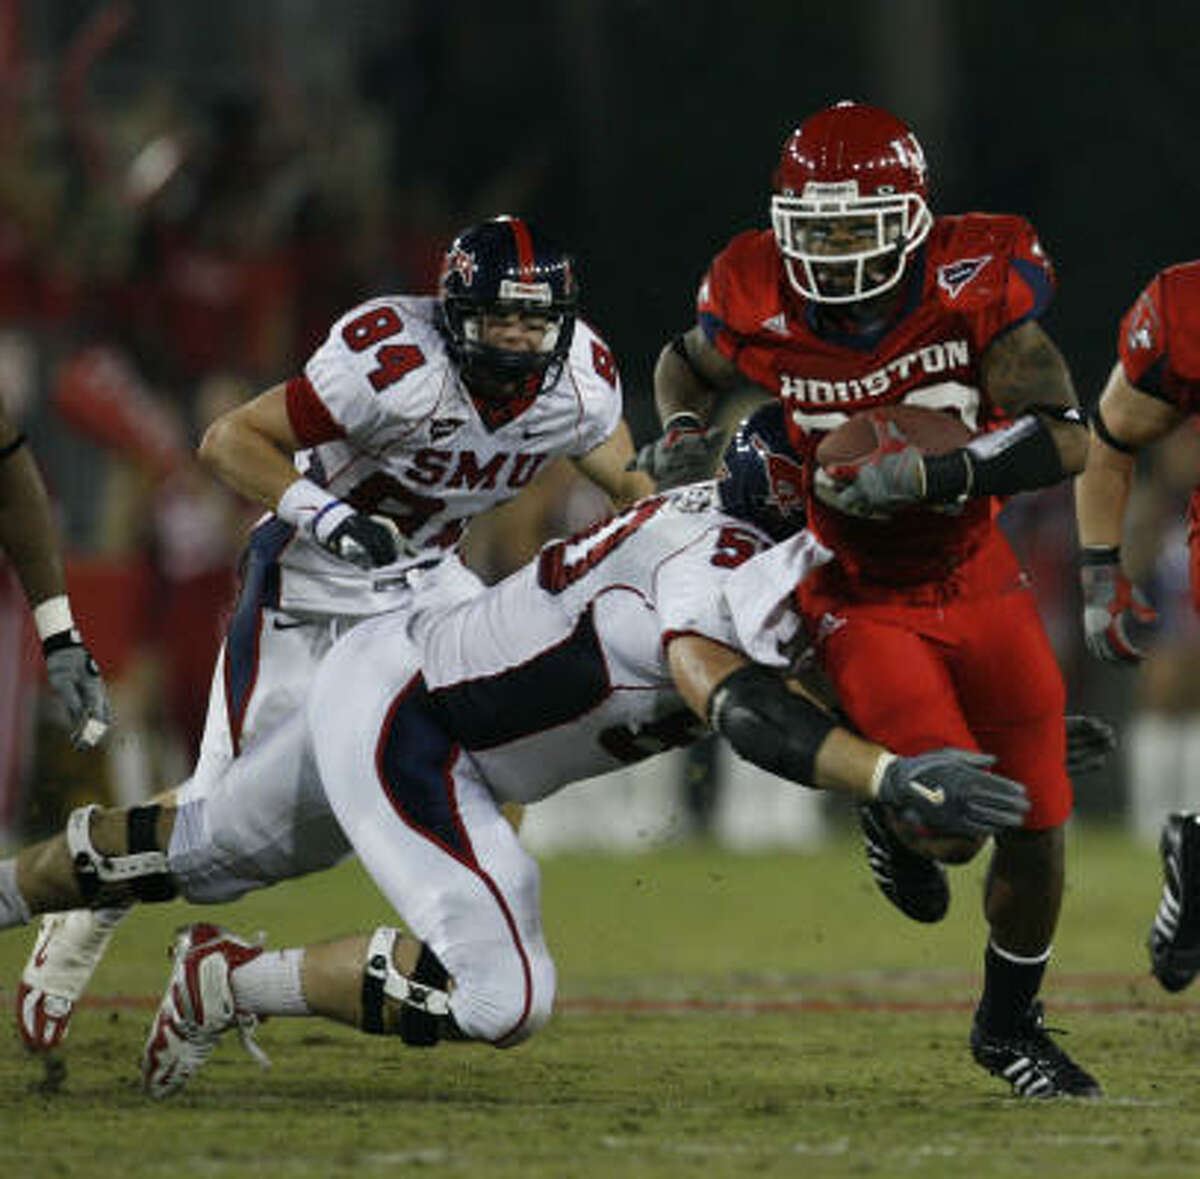 Houston's Kenneth Fontenette returns an interception during the Cougars' 38-28 win over SMU.